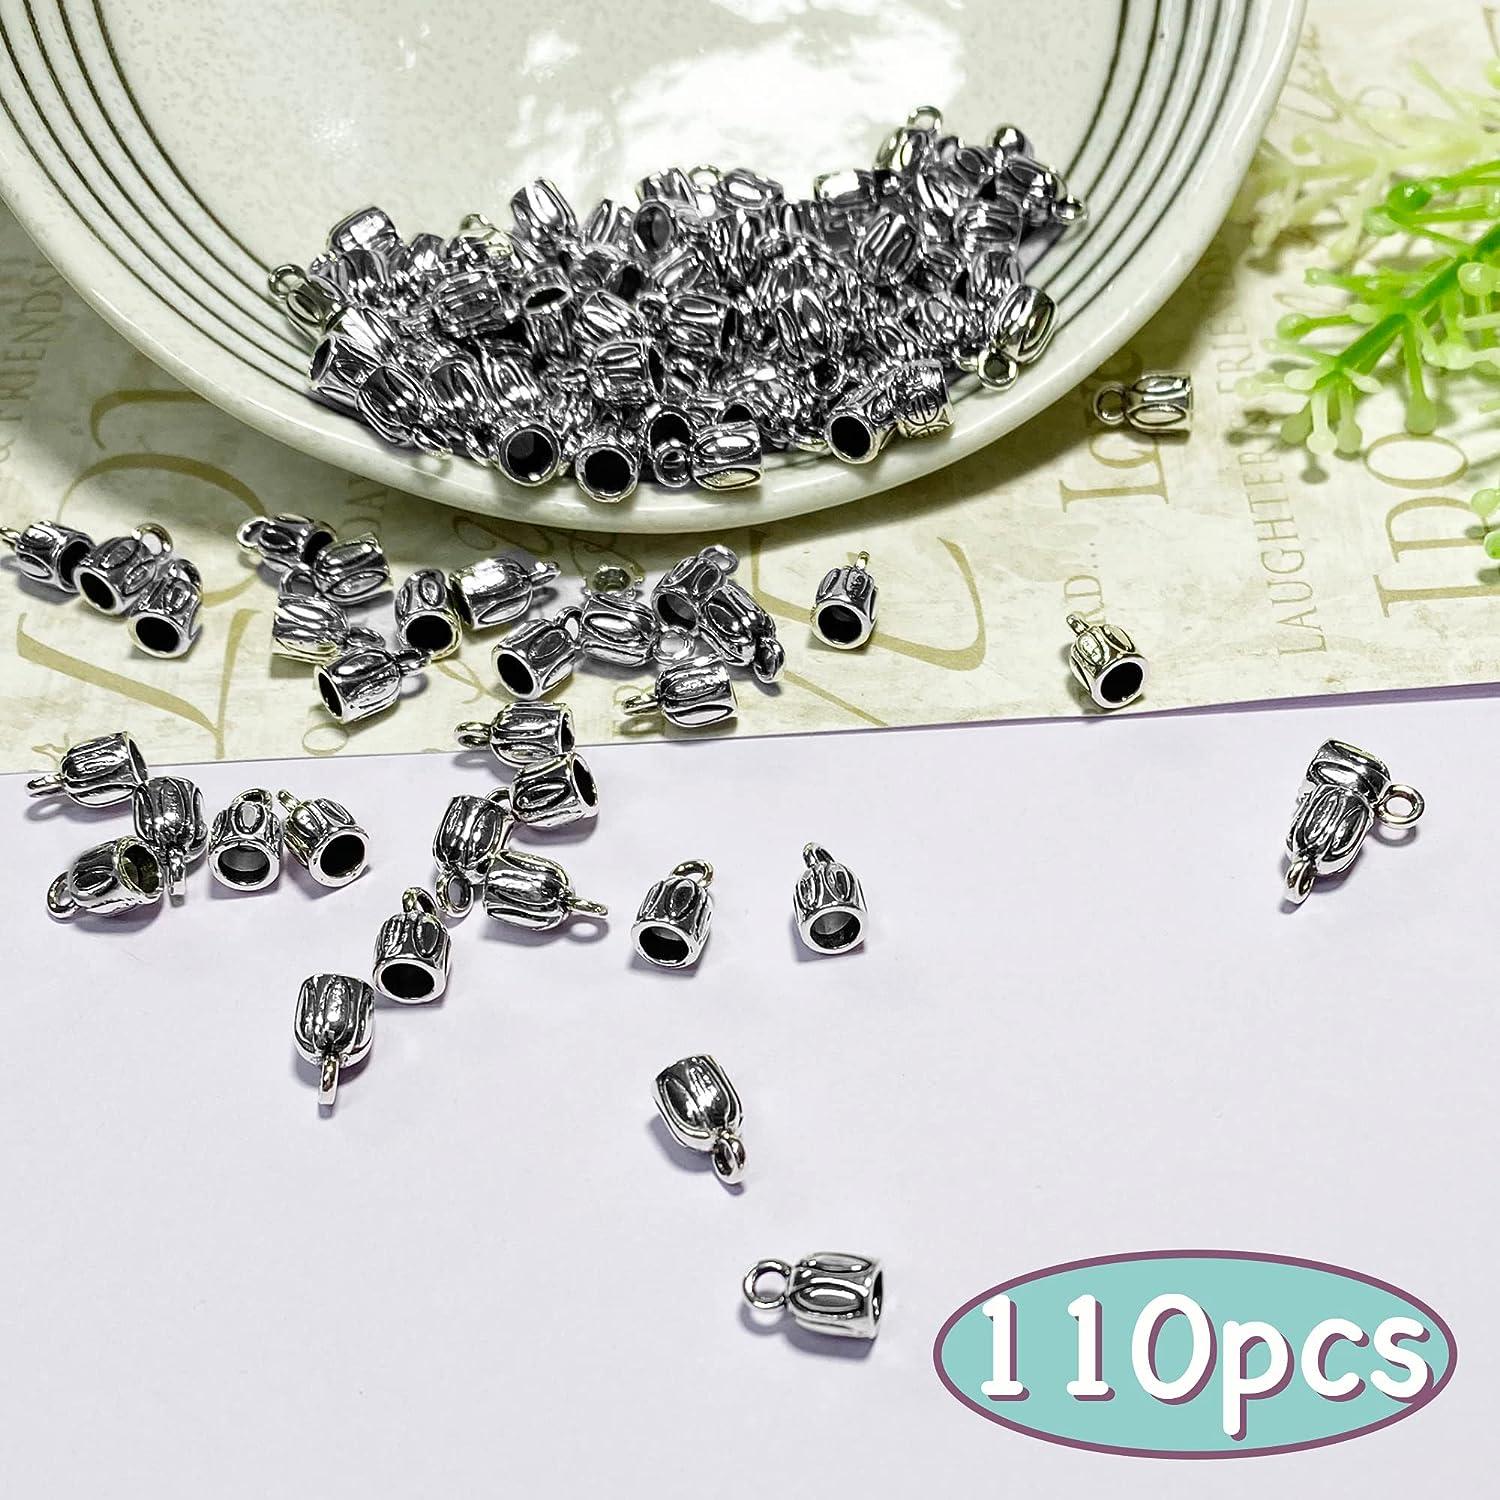 100 Clip Crimp Beads Cord End Caps Stopper Spacers Beads Jewelry Making  Findings